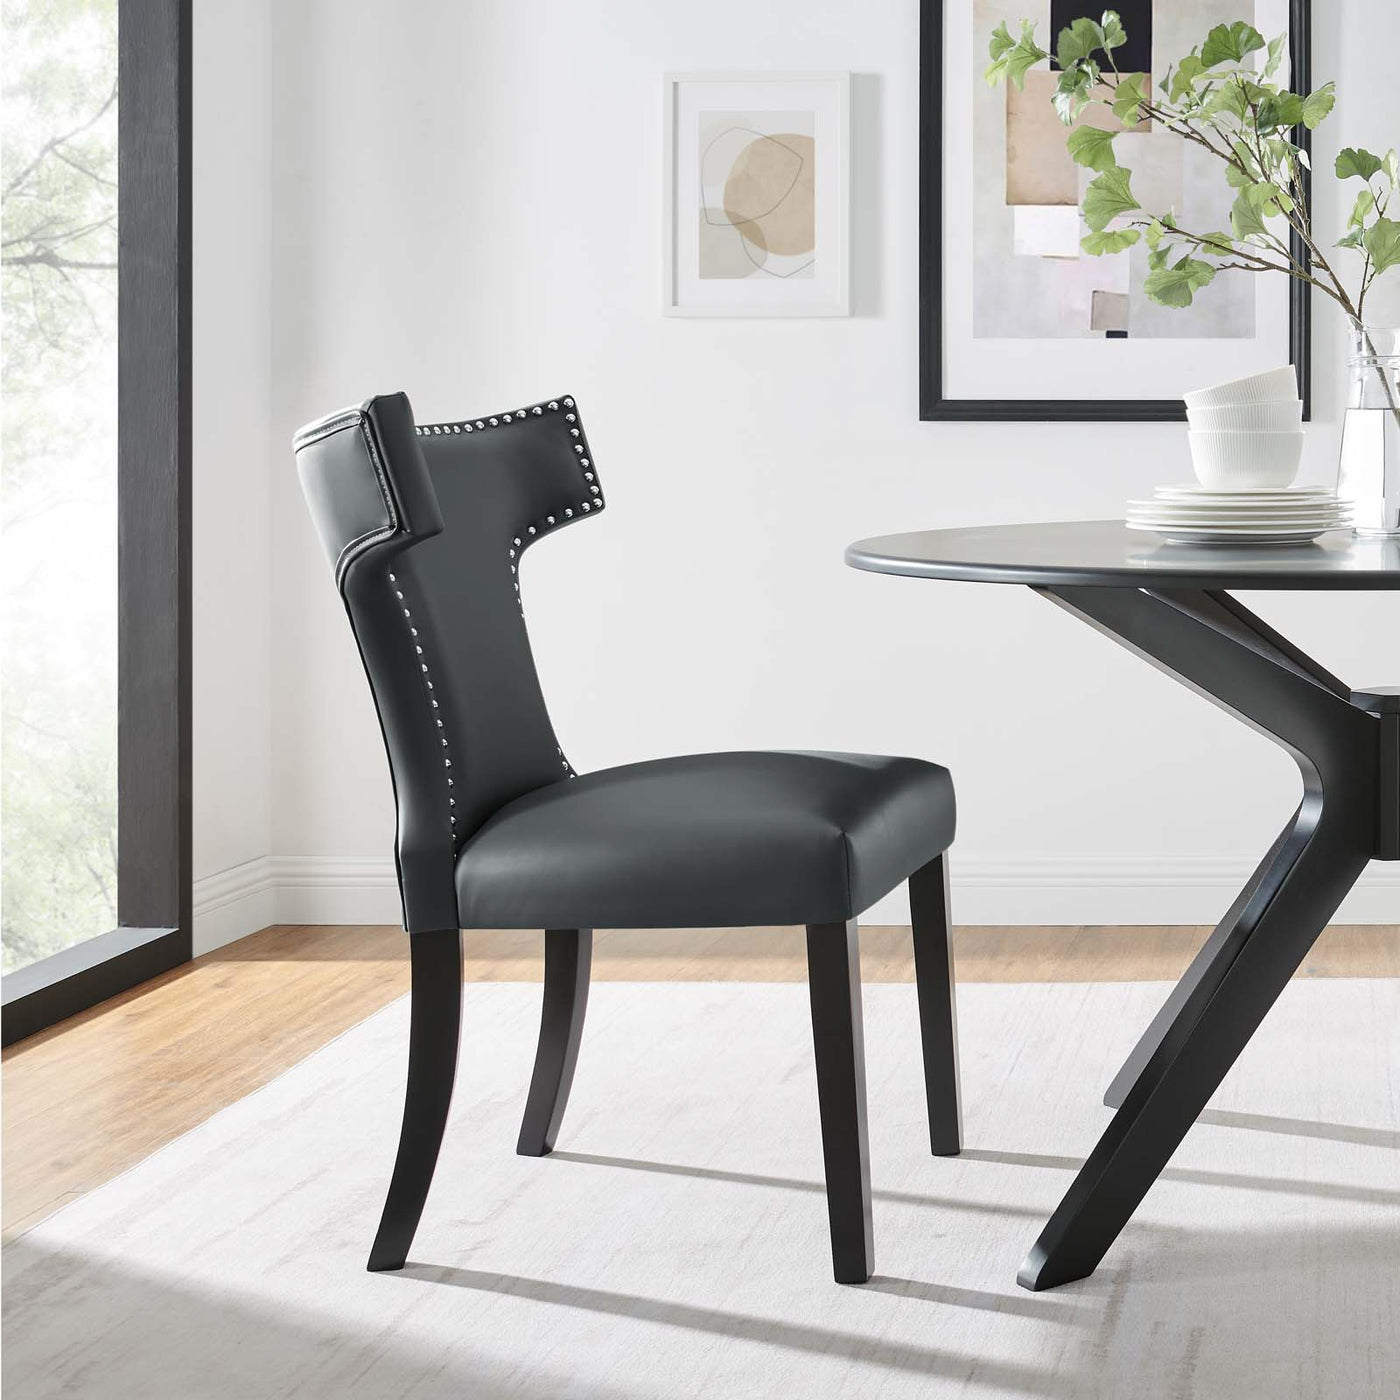 Curve Vegan Leather Dining Chair